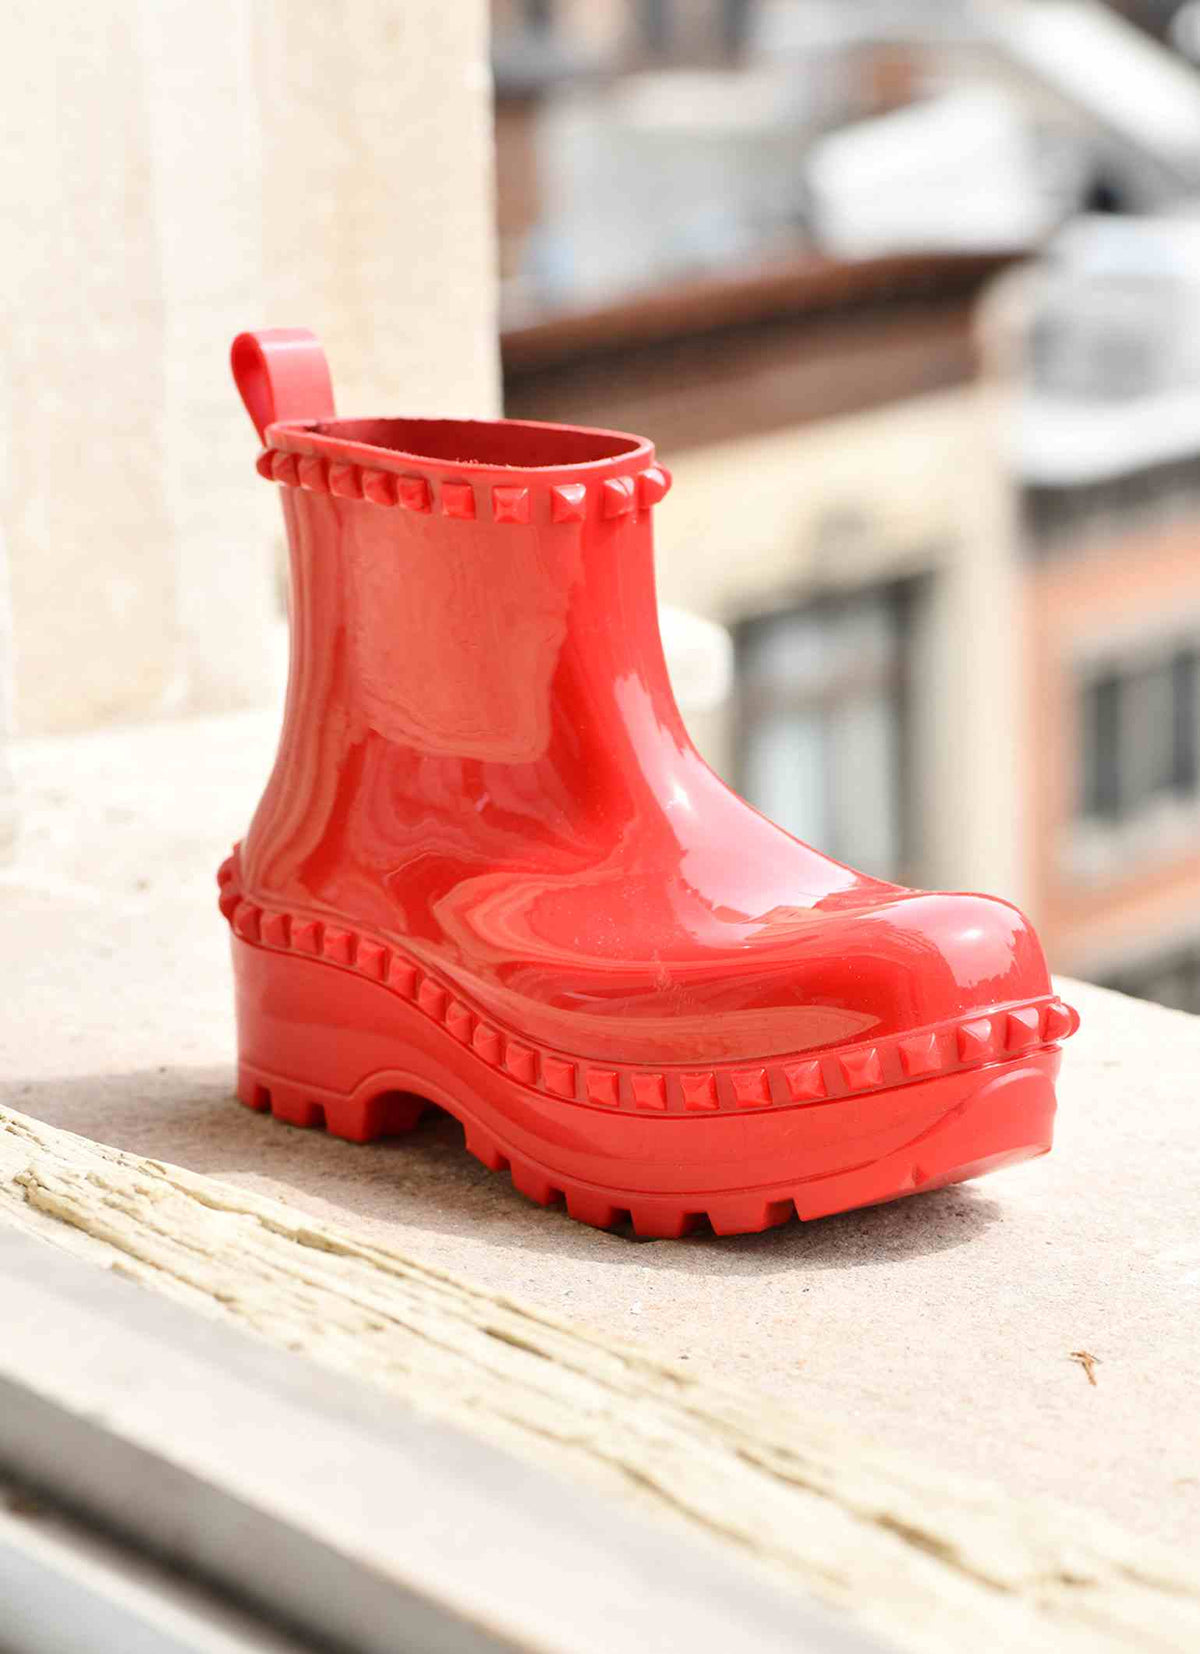 Vegan Graziano Carmen Sol jelly boots for women in color red